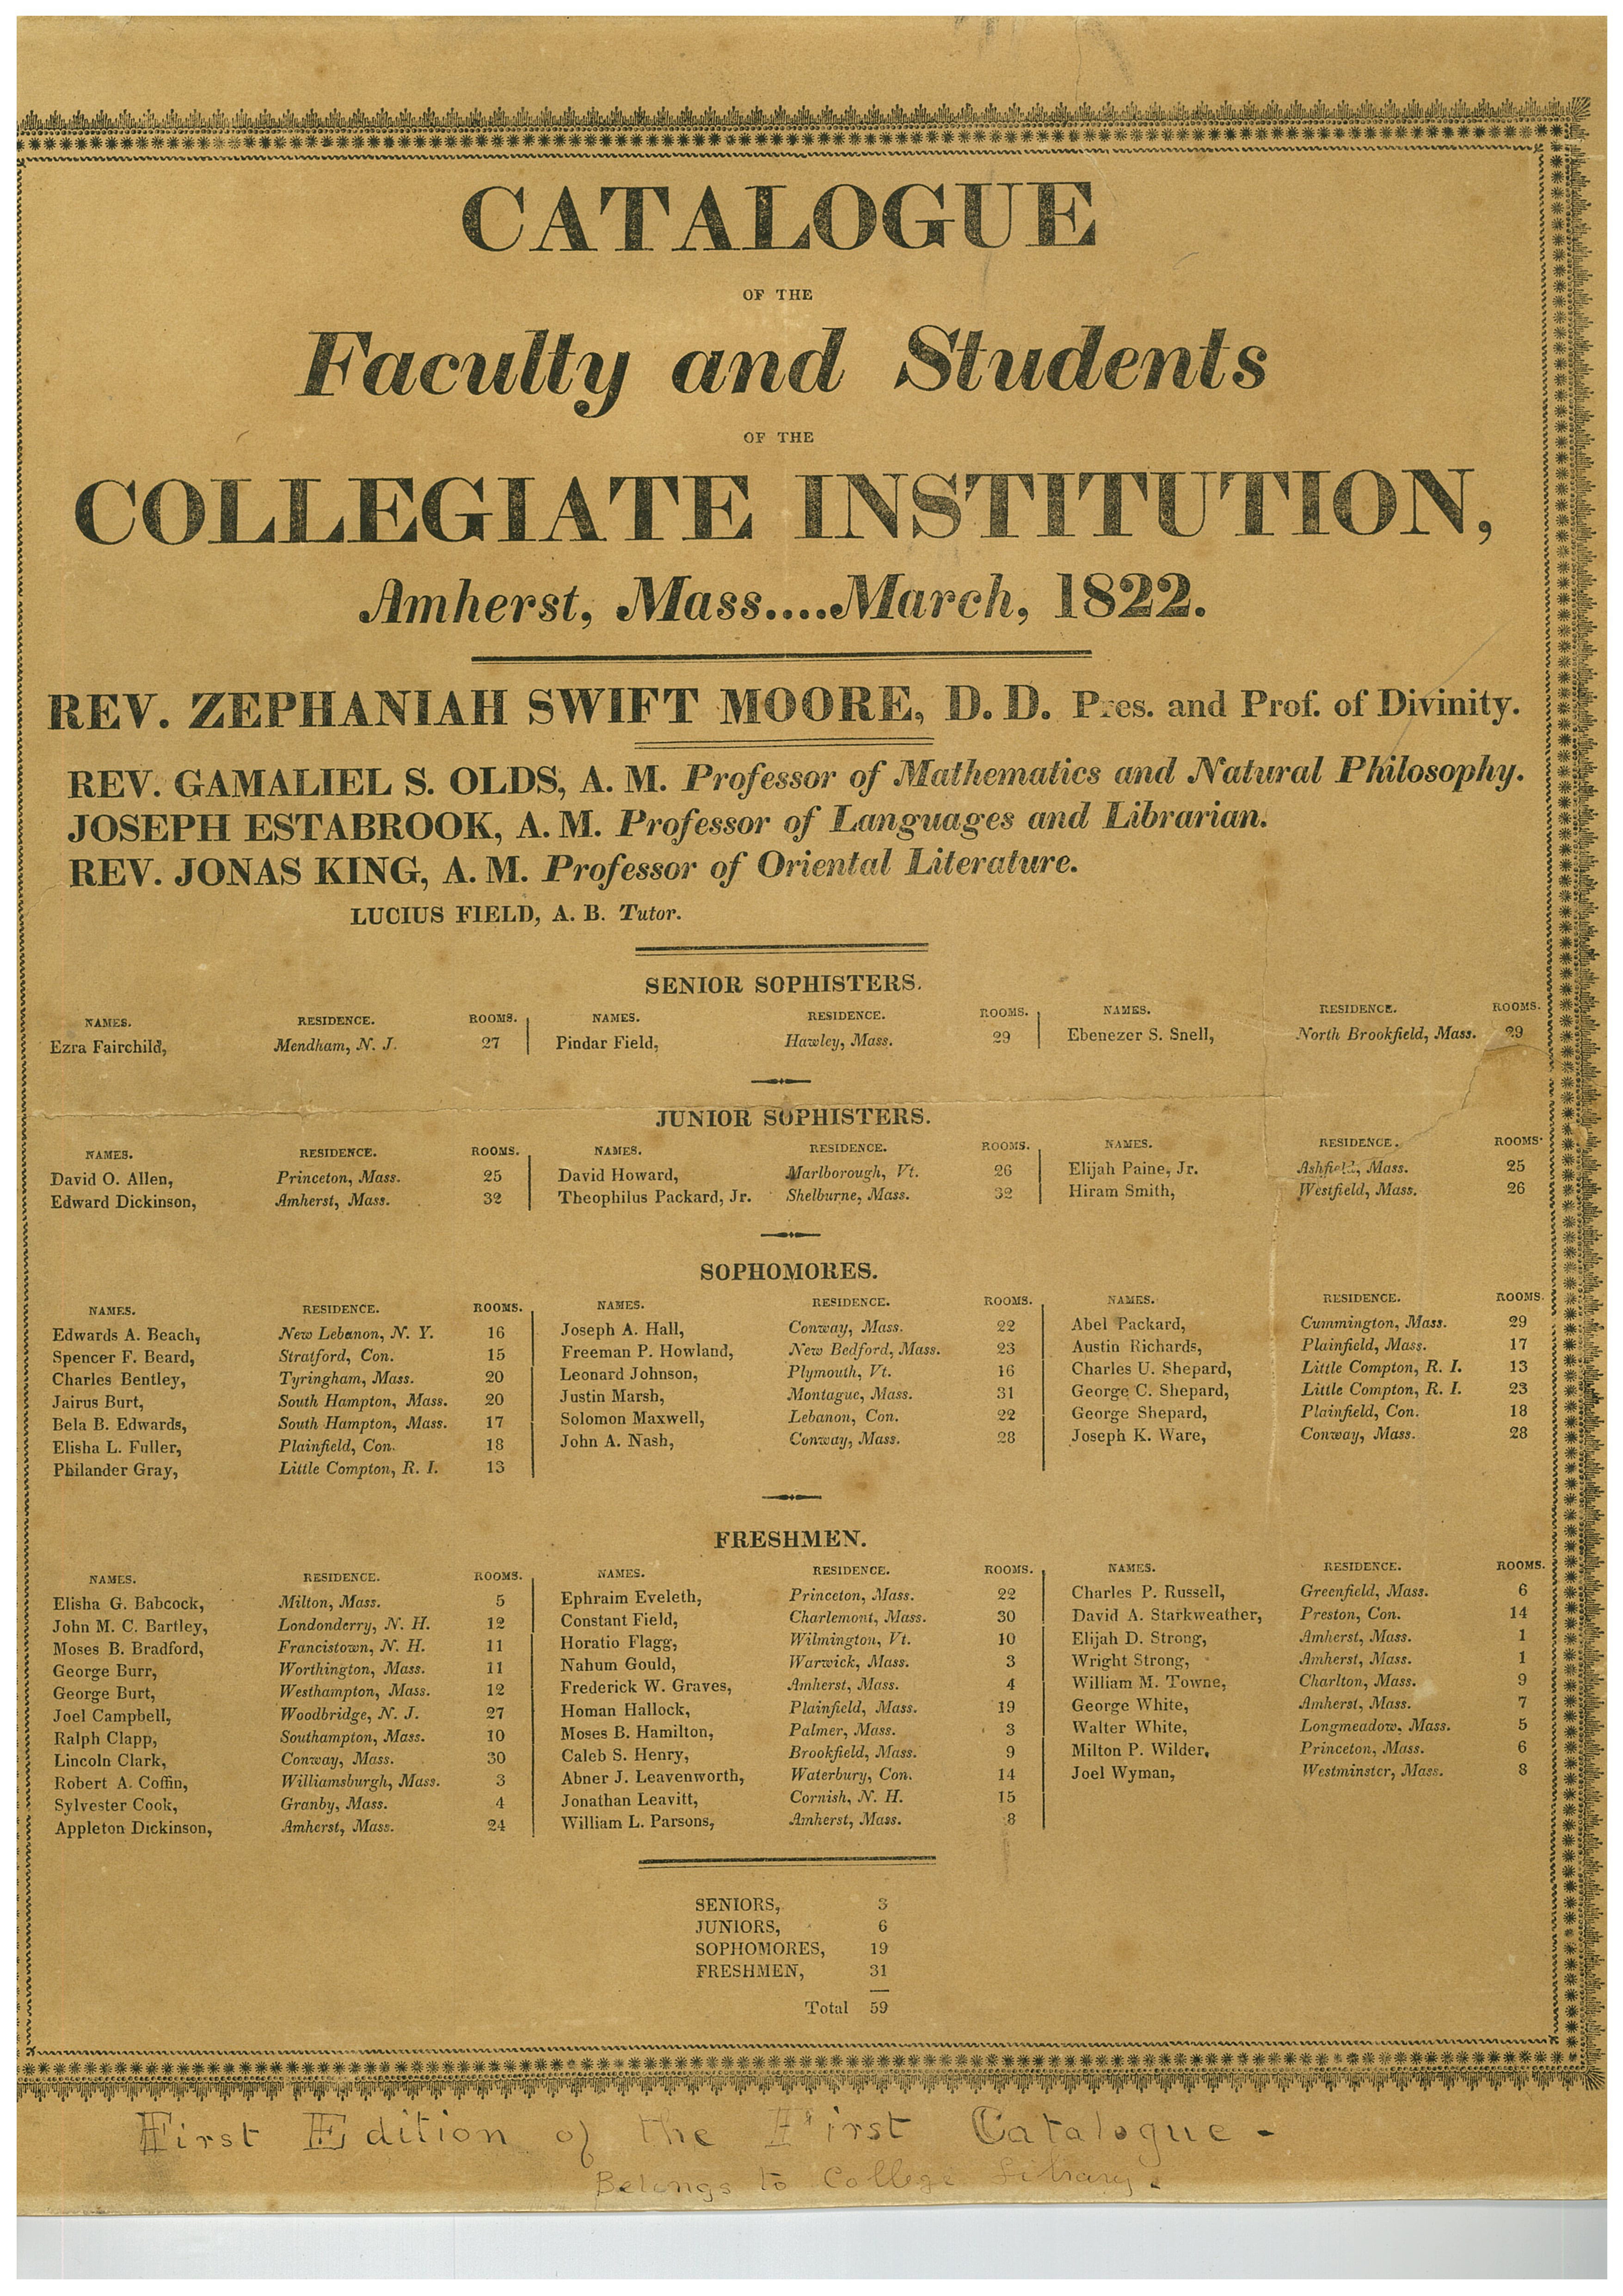 First catalogue broadside of the Collegiate Institution, 1822 Mar in Amherst College Early History Collection (Box OS-1, Folder 9)